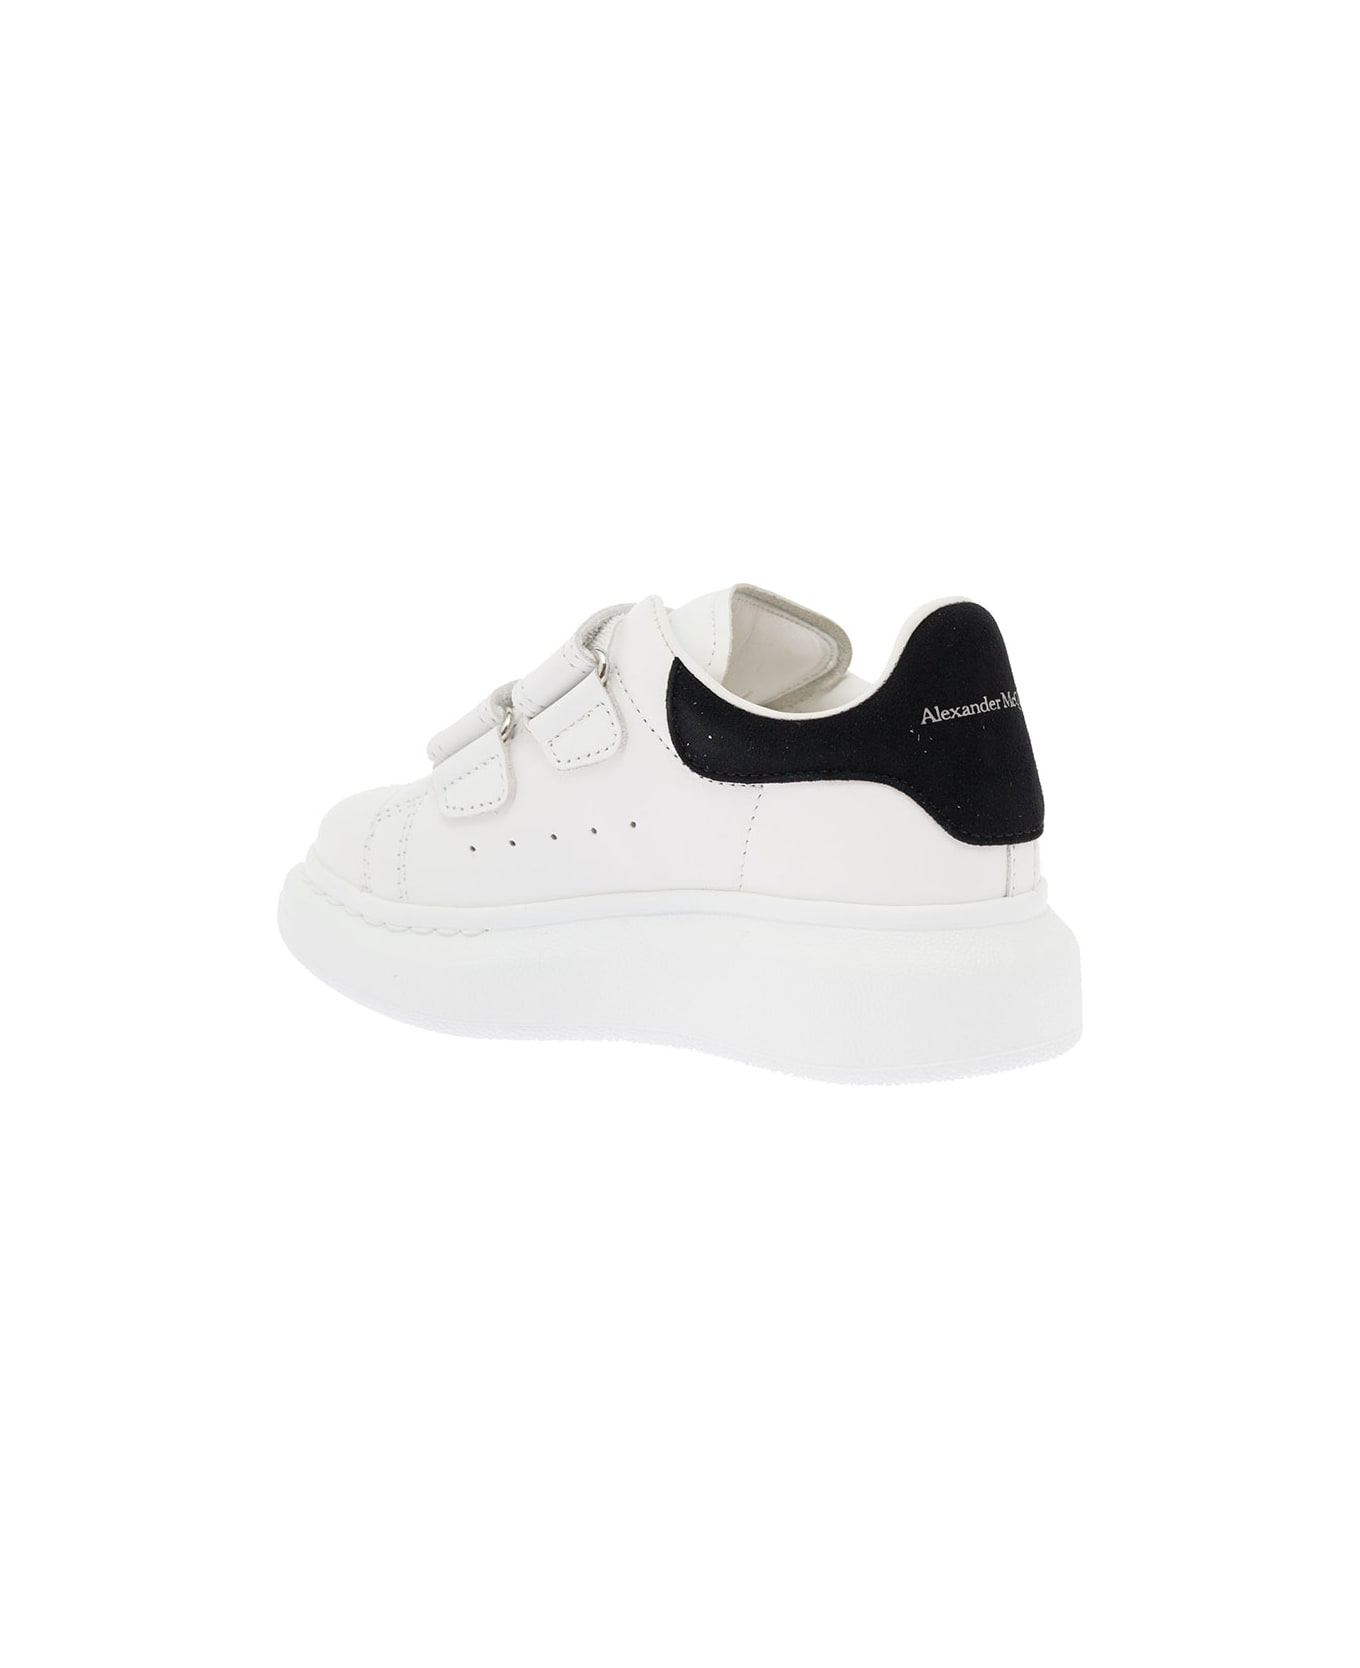 Alexander McQueen Kids Boy's Oversize White And Black Leather  Sneakers - White